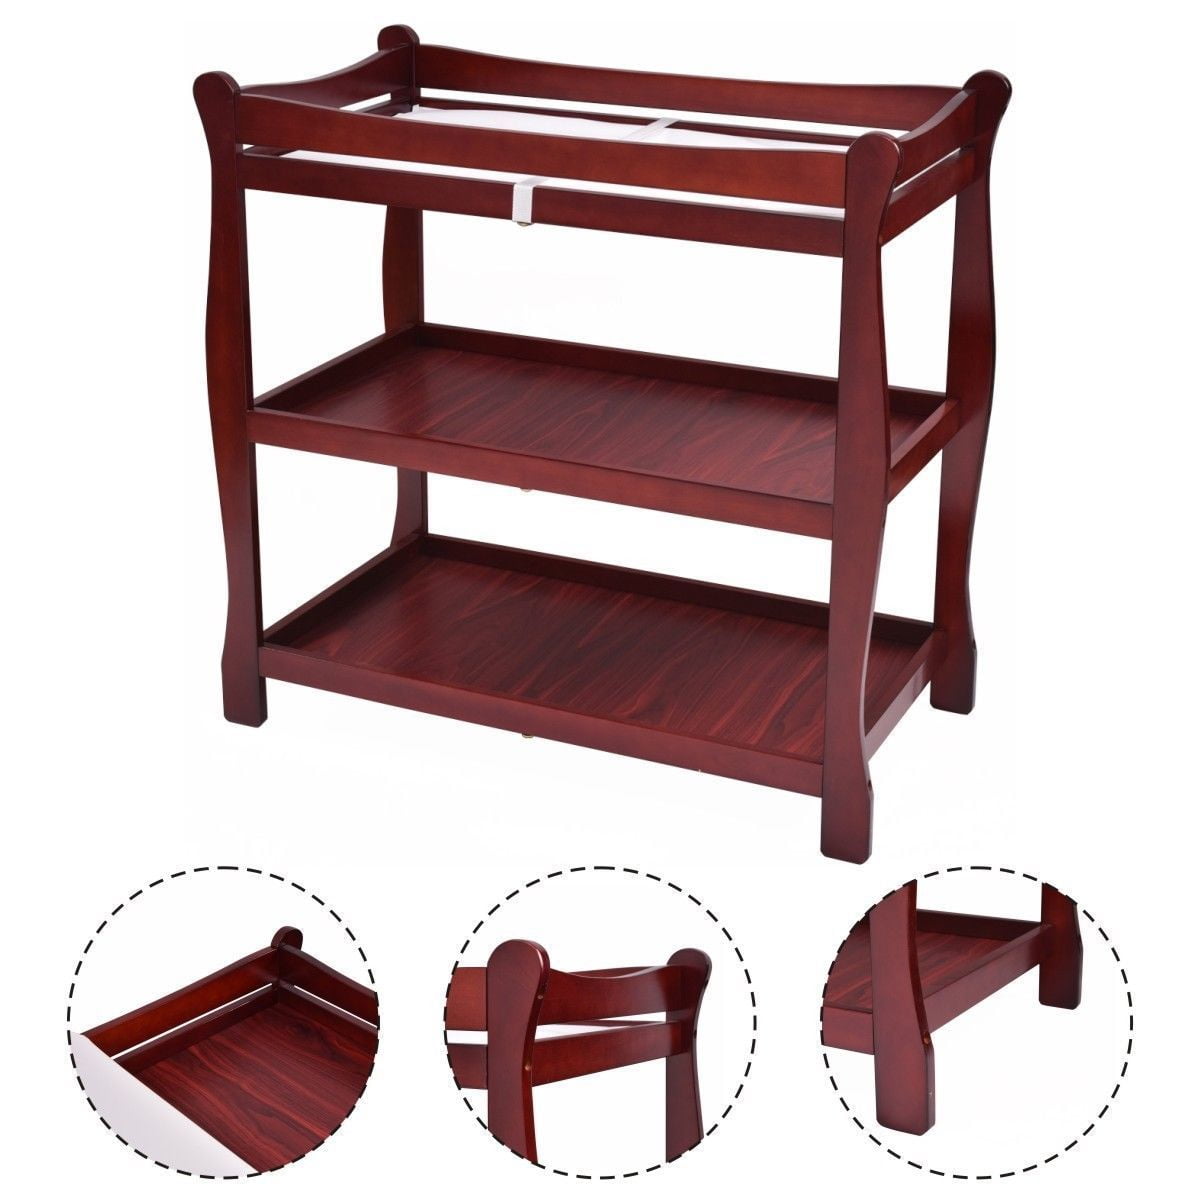 cherry wood changing table